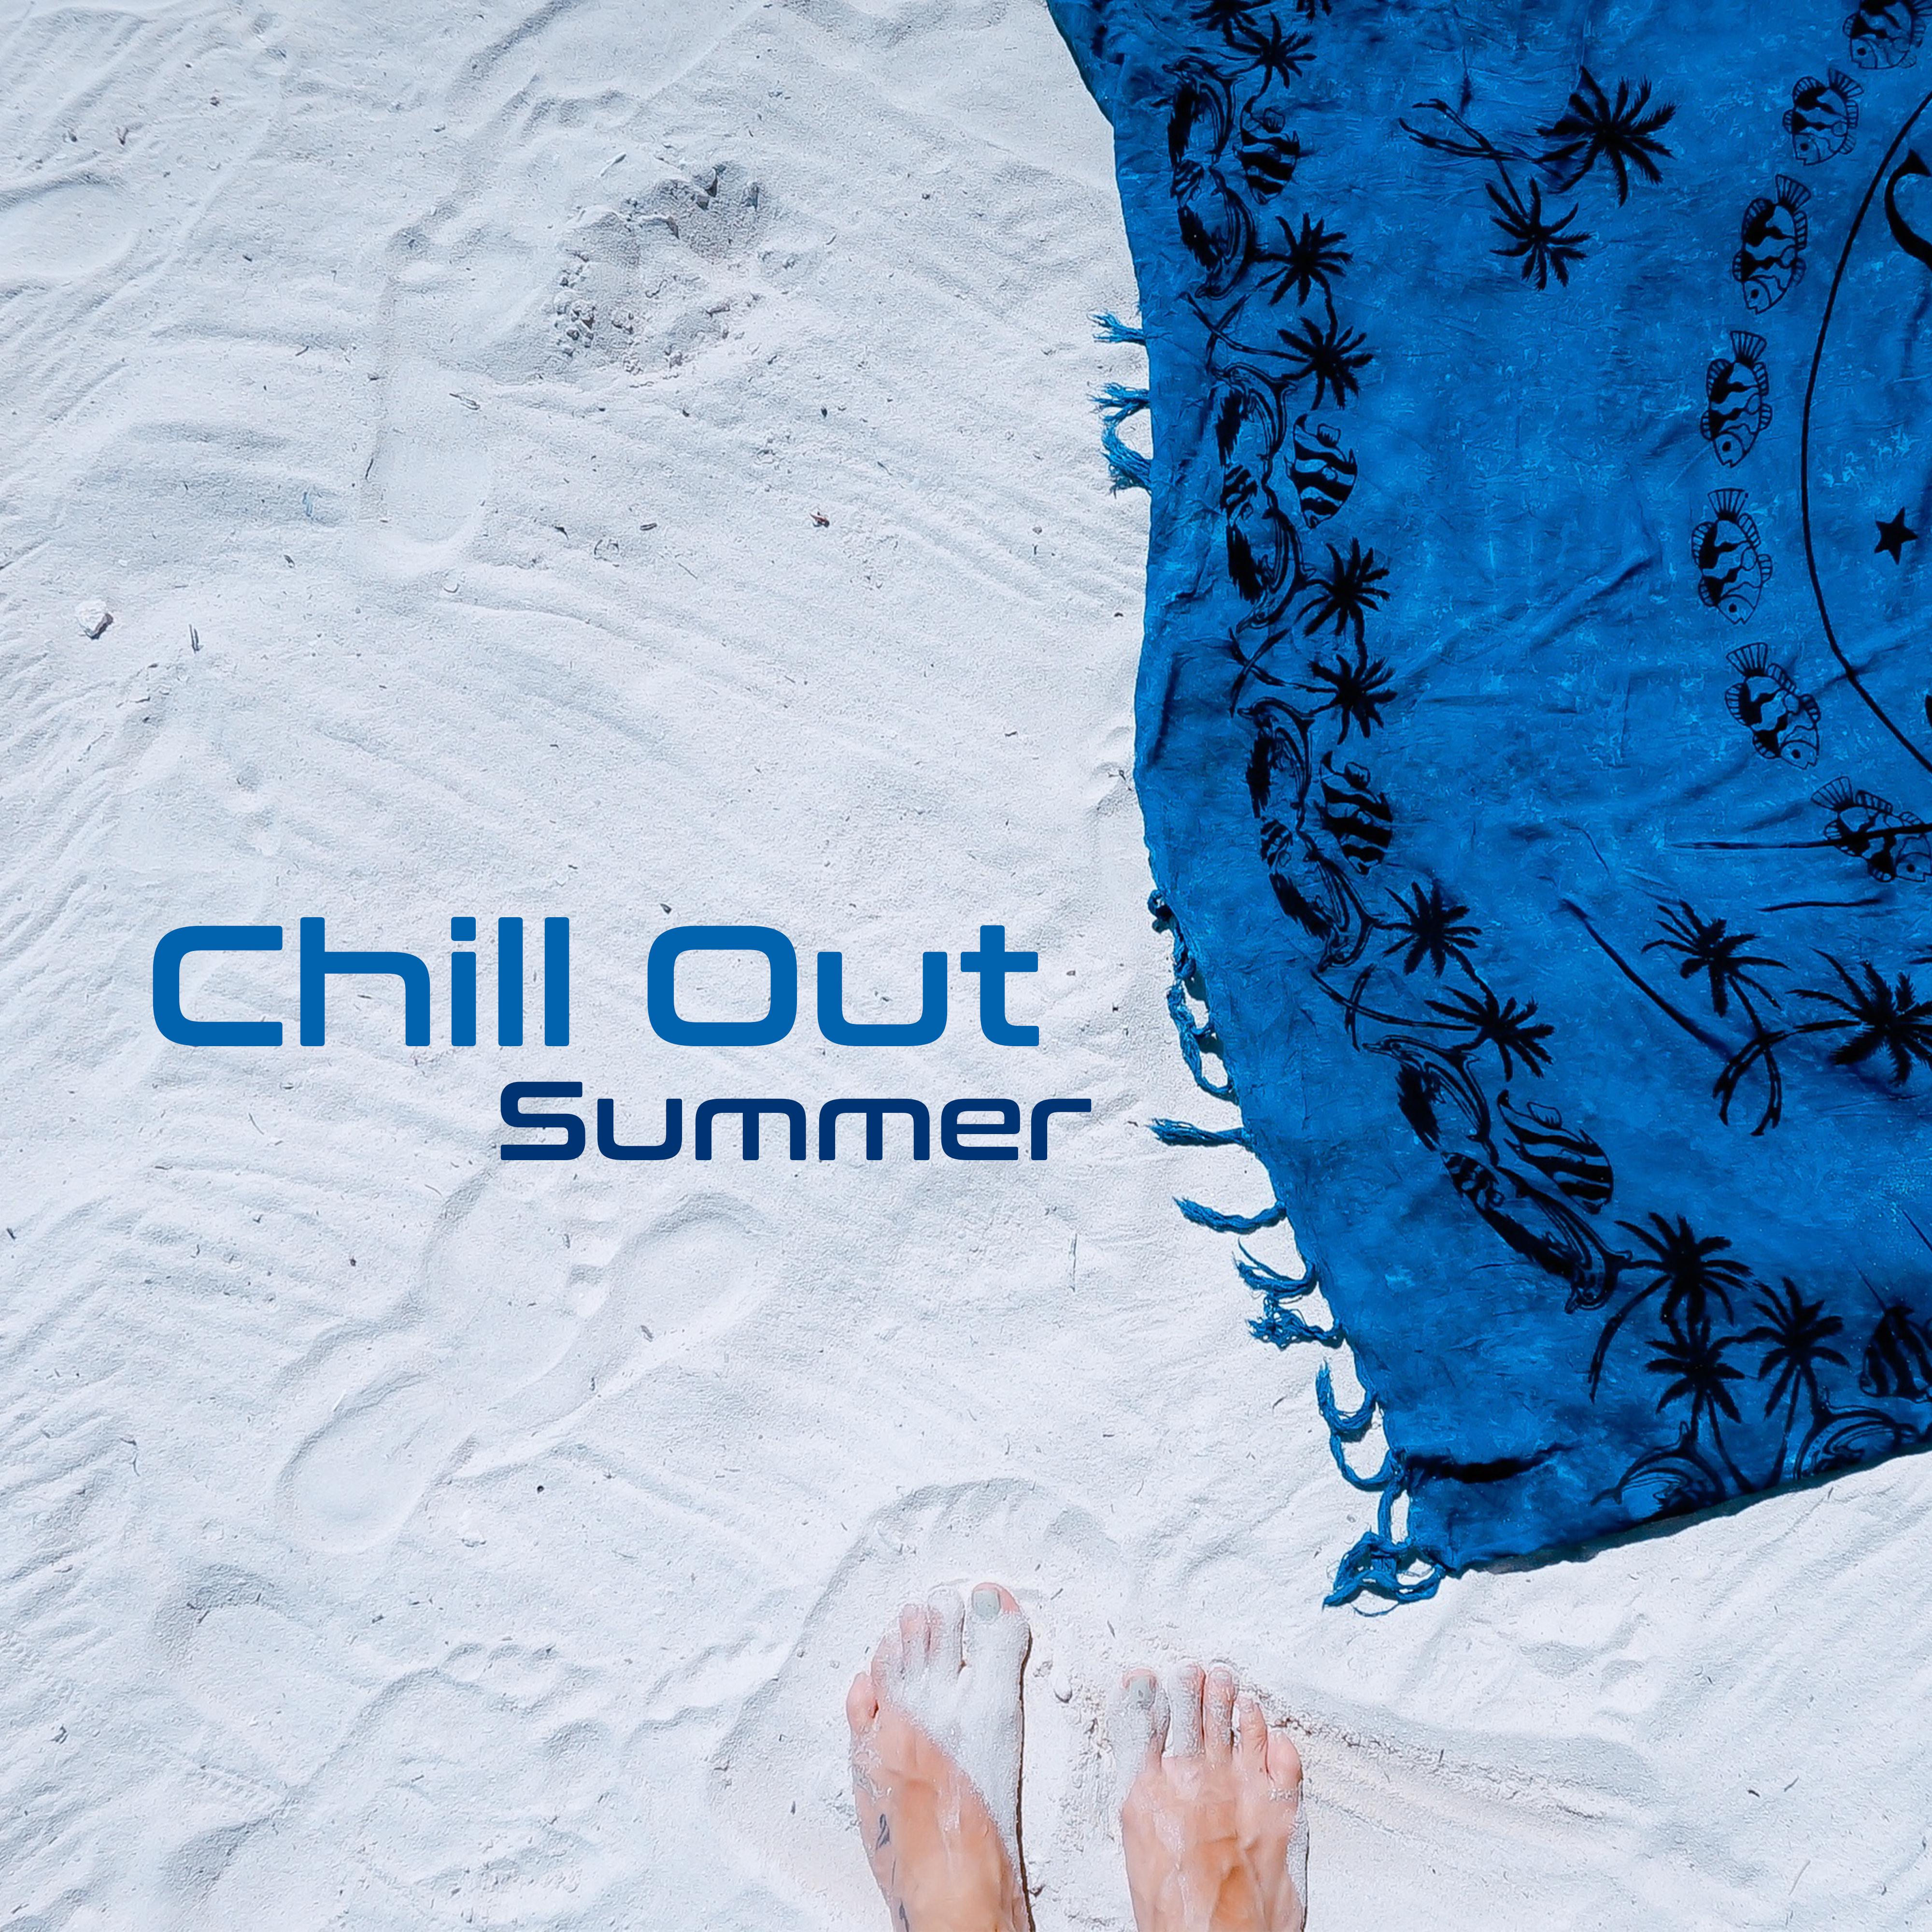 Chill Out Summer – Calm Sounds for Holidays, Tropical Island, Waves of Calmness, Sunny Day